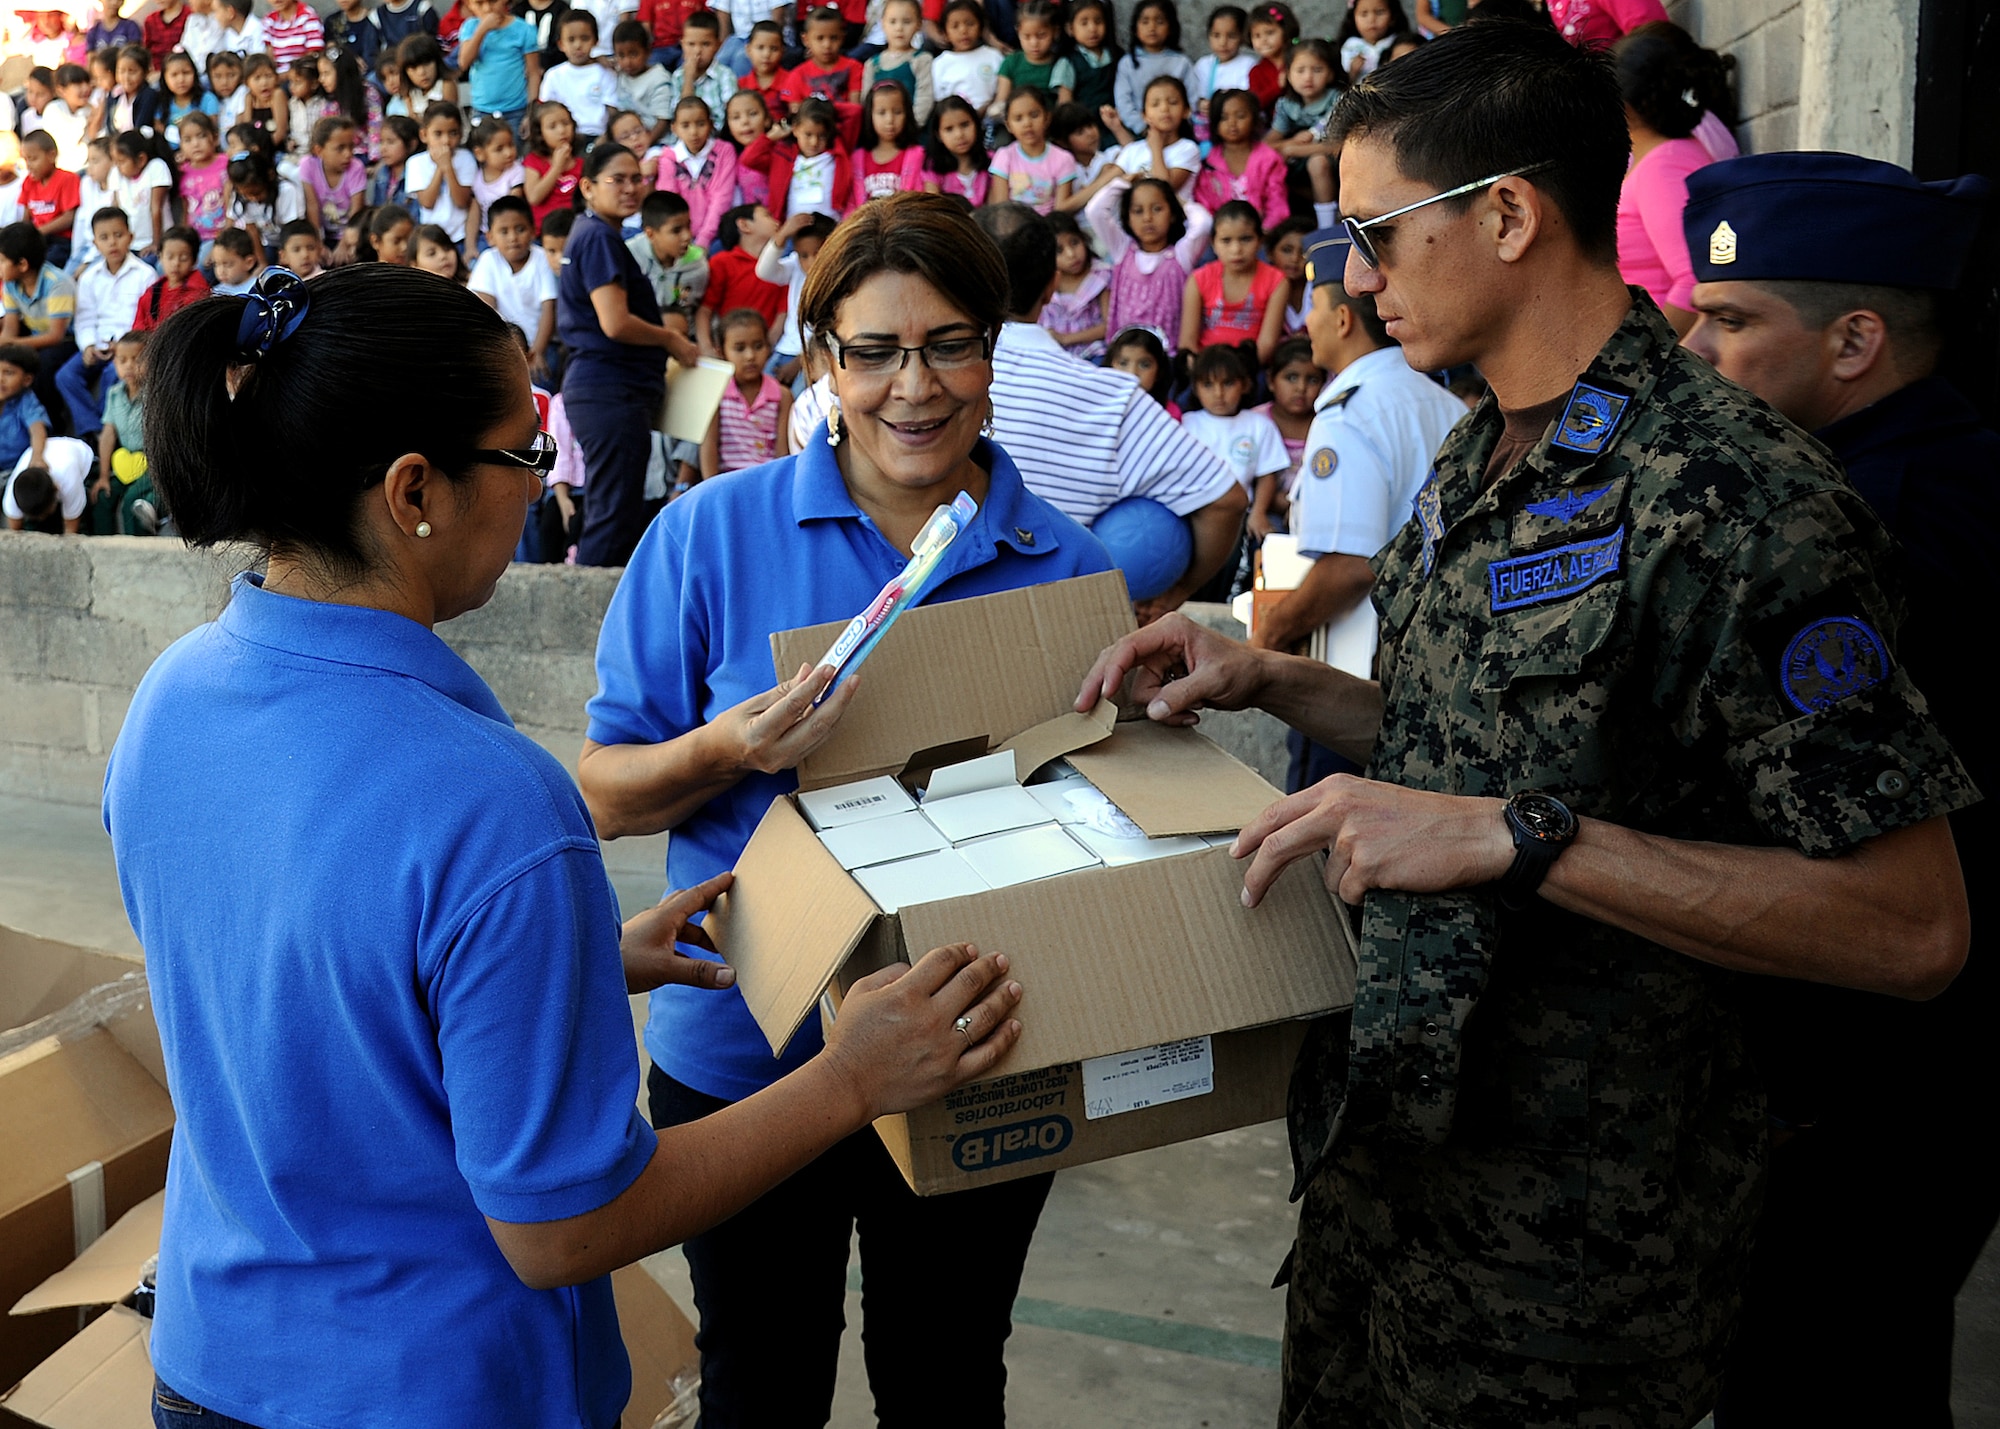 Maritsa Sauceda and Elia Ramona Cruz de Landa, Honduran Air Force officer spouses' society members, look through some of the donated items before distributing them to the students at the Instituto Evangélico El Verbo, in the Nueva Suyapa community of Tegucigalpa, Honduras, Feb. 17.  More than 20 air advisors from the Air Mobility Command's 571st Mobility Support Advisory Squadron and Airmen from the Honduran Air Force extended their building partner capacity mission to the community by visiting two Honduran schools Feb. 14 and 17.  (U.S. Air Force photo by Tech. Sgt. Lesley Waters)